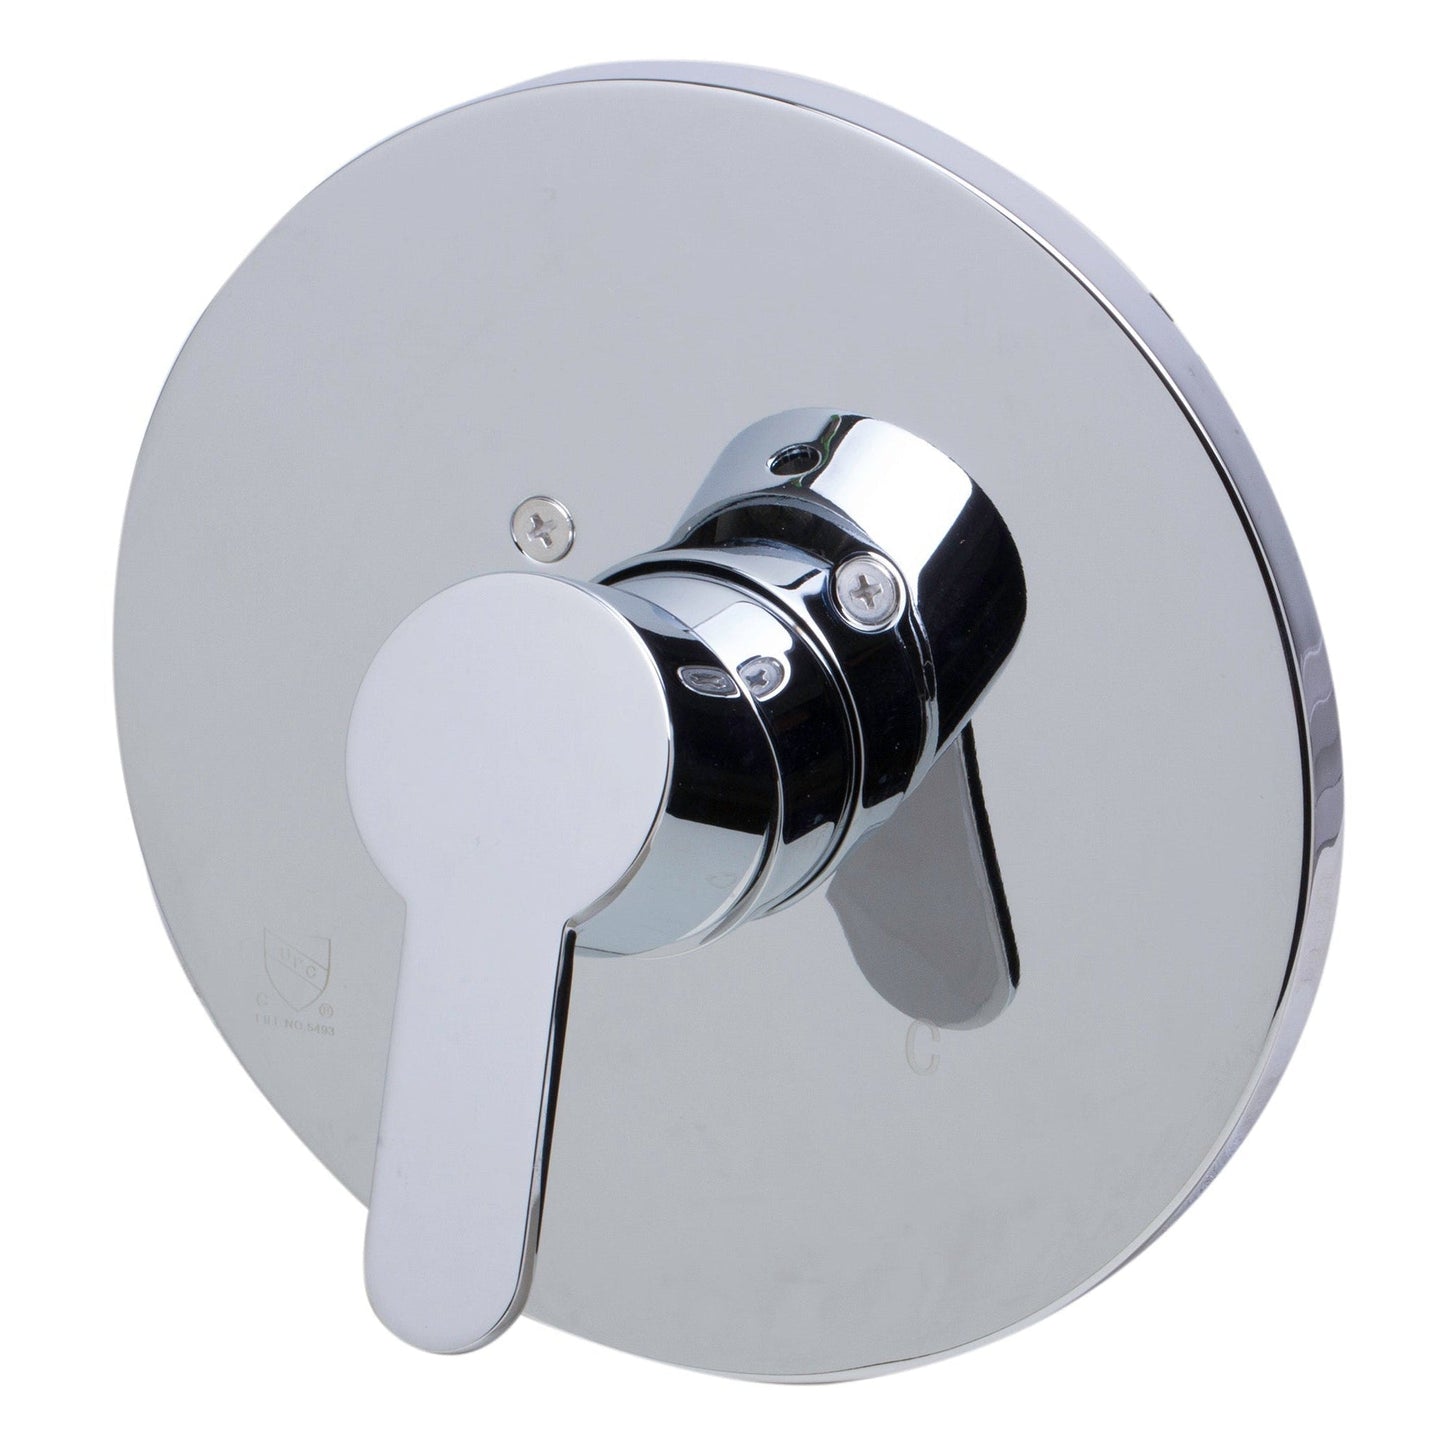 ALFI Brand AB3001-PC Round Polished Chrome Shower Valve Mixer With Single Lever Handle